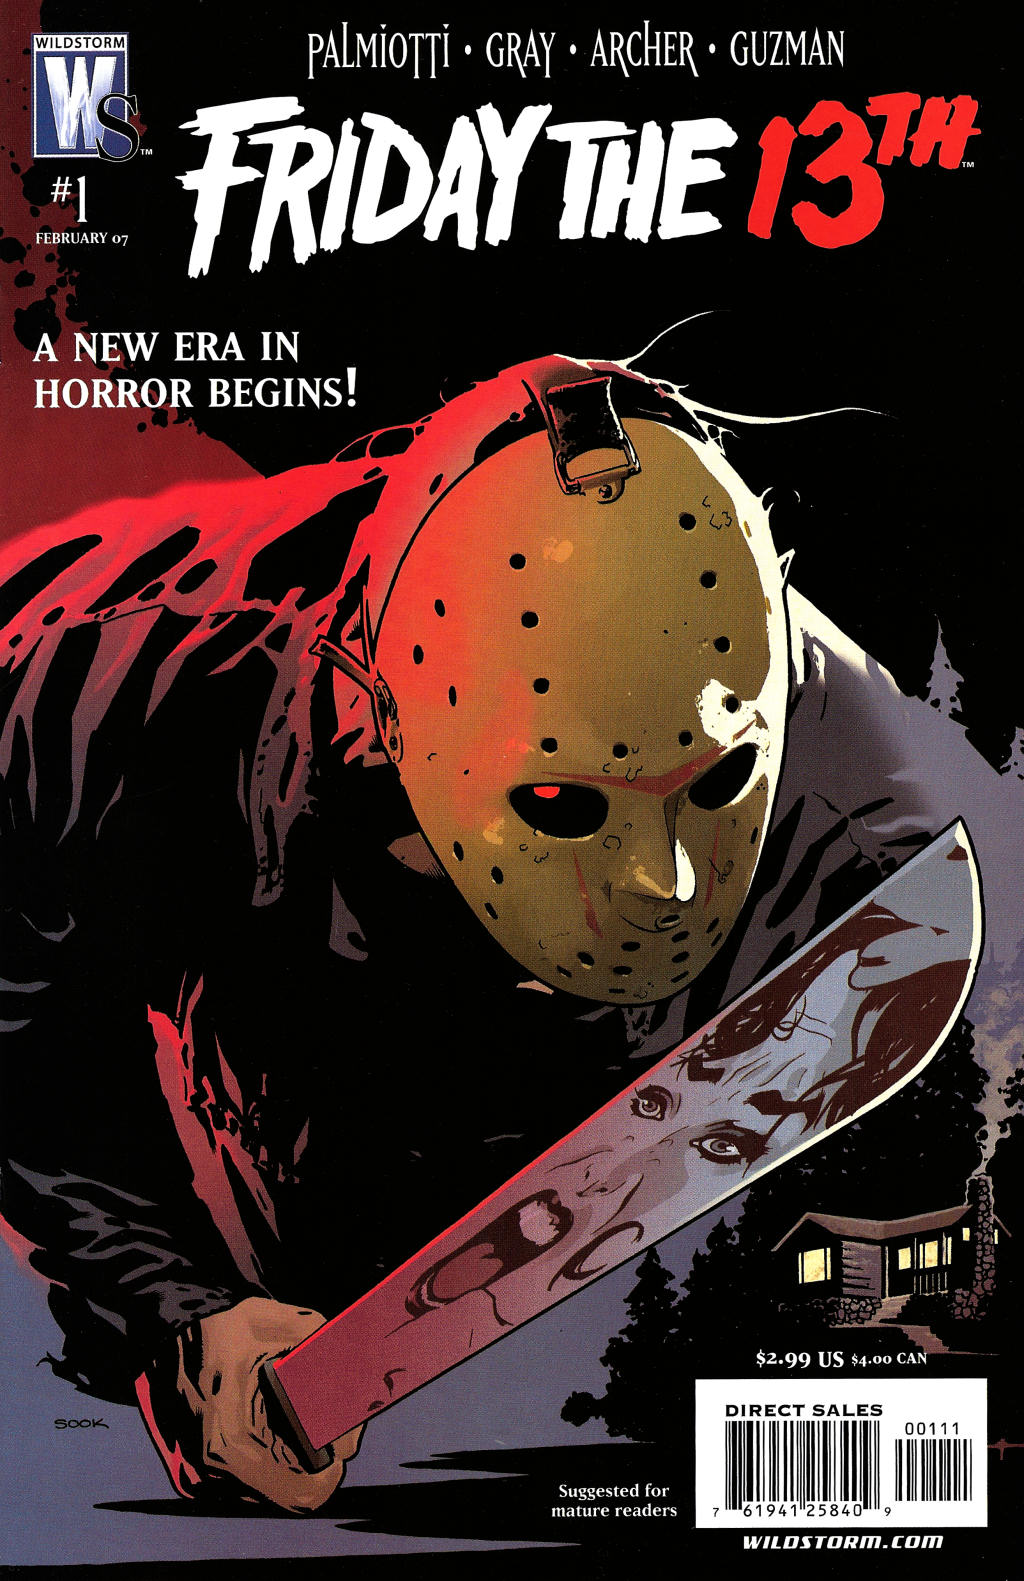 Friday The 13th Issue 1 | Read Friday The 13th Issue 1 comic online in high  quality. Website to search, classify, summarize, and evaluate comics.